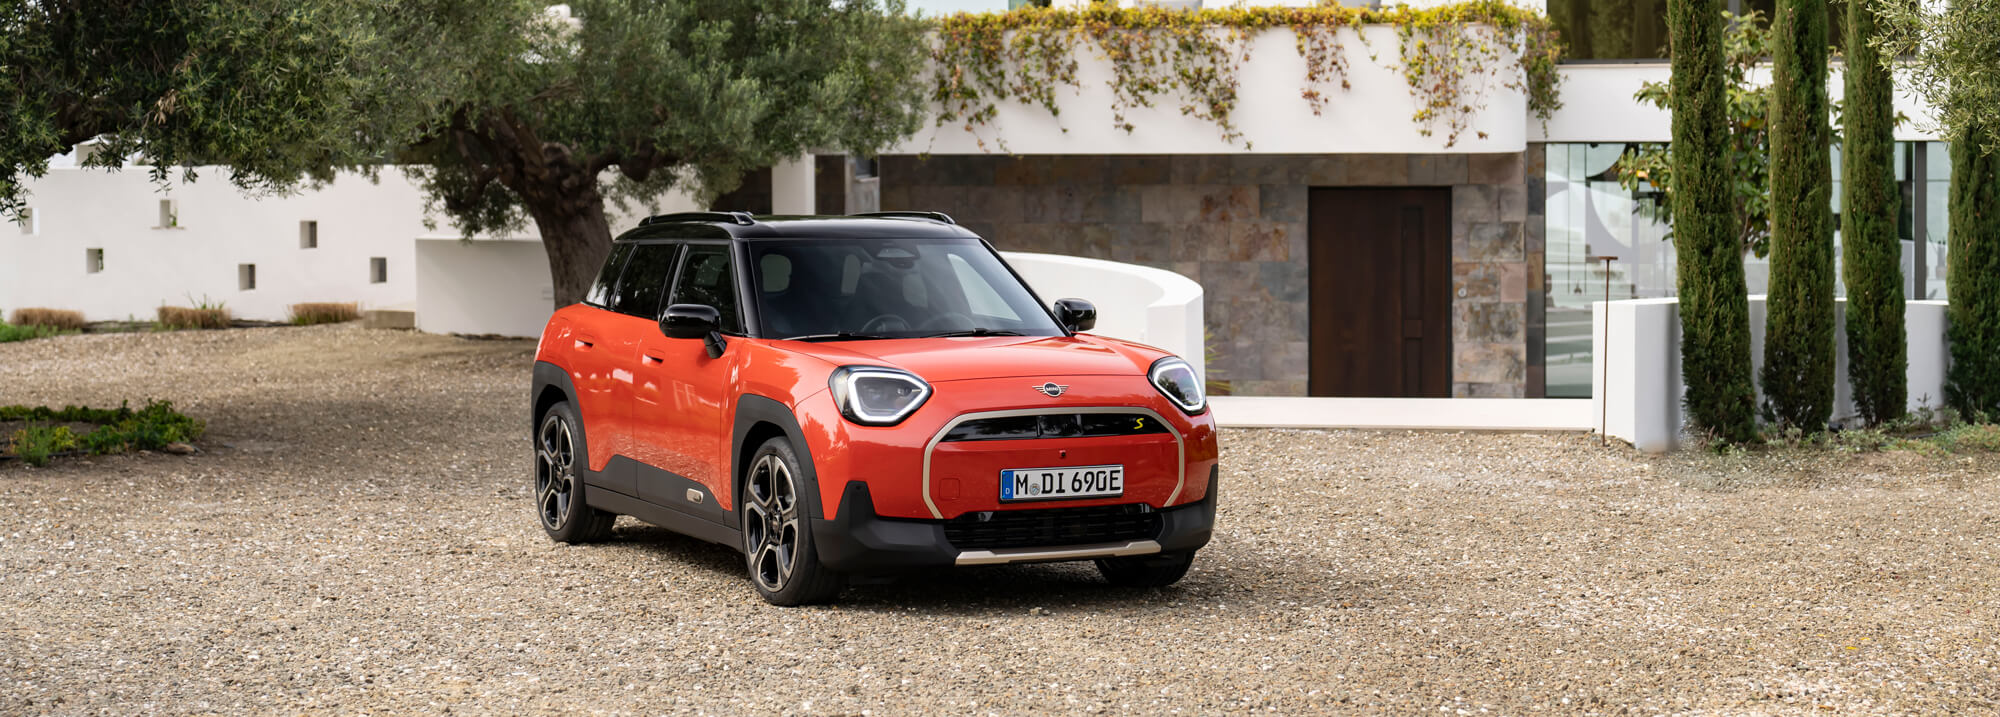 All-new Mini Aceman unveiled video-banner